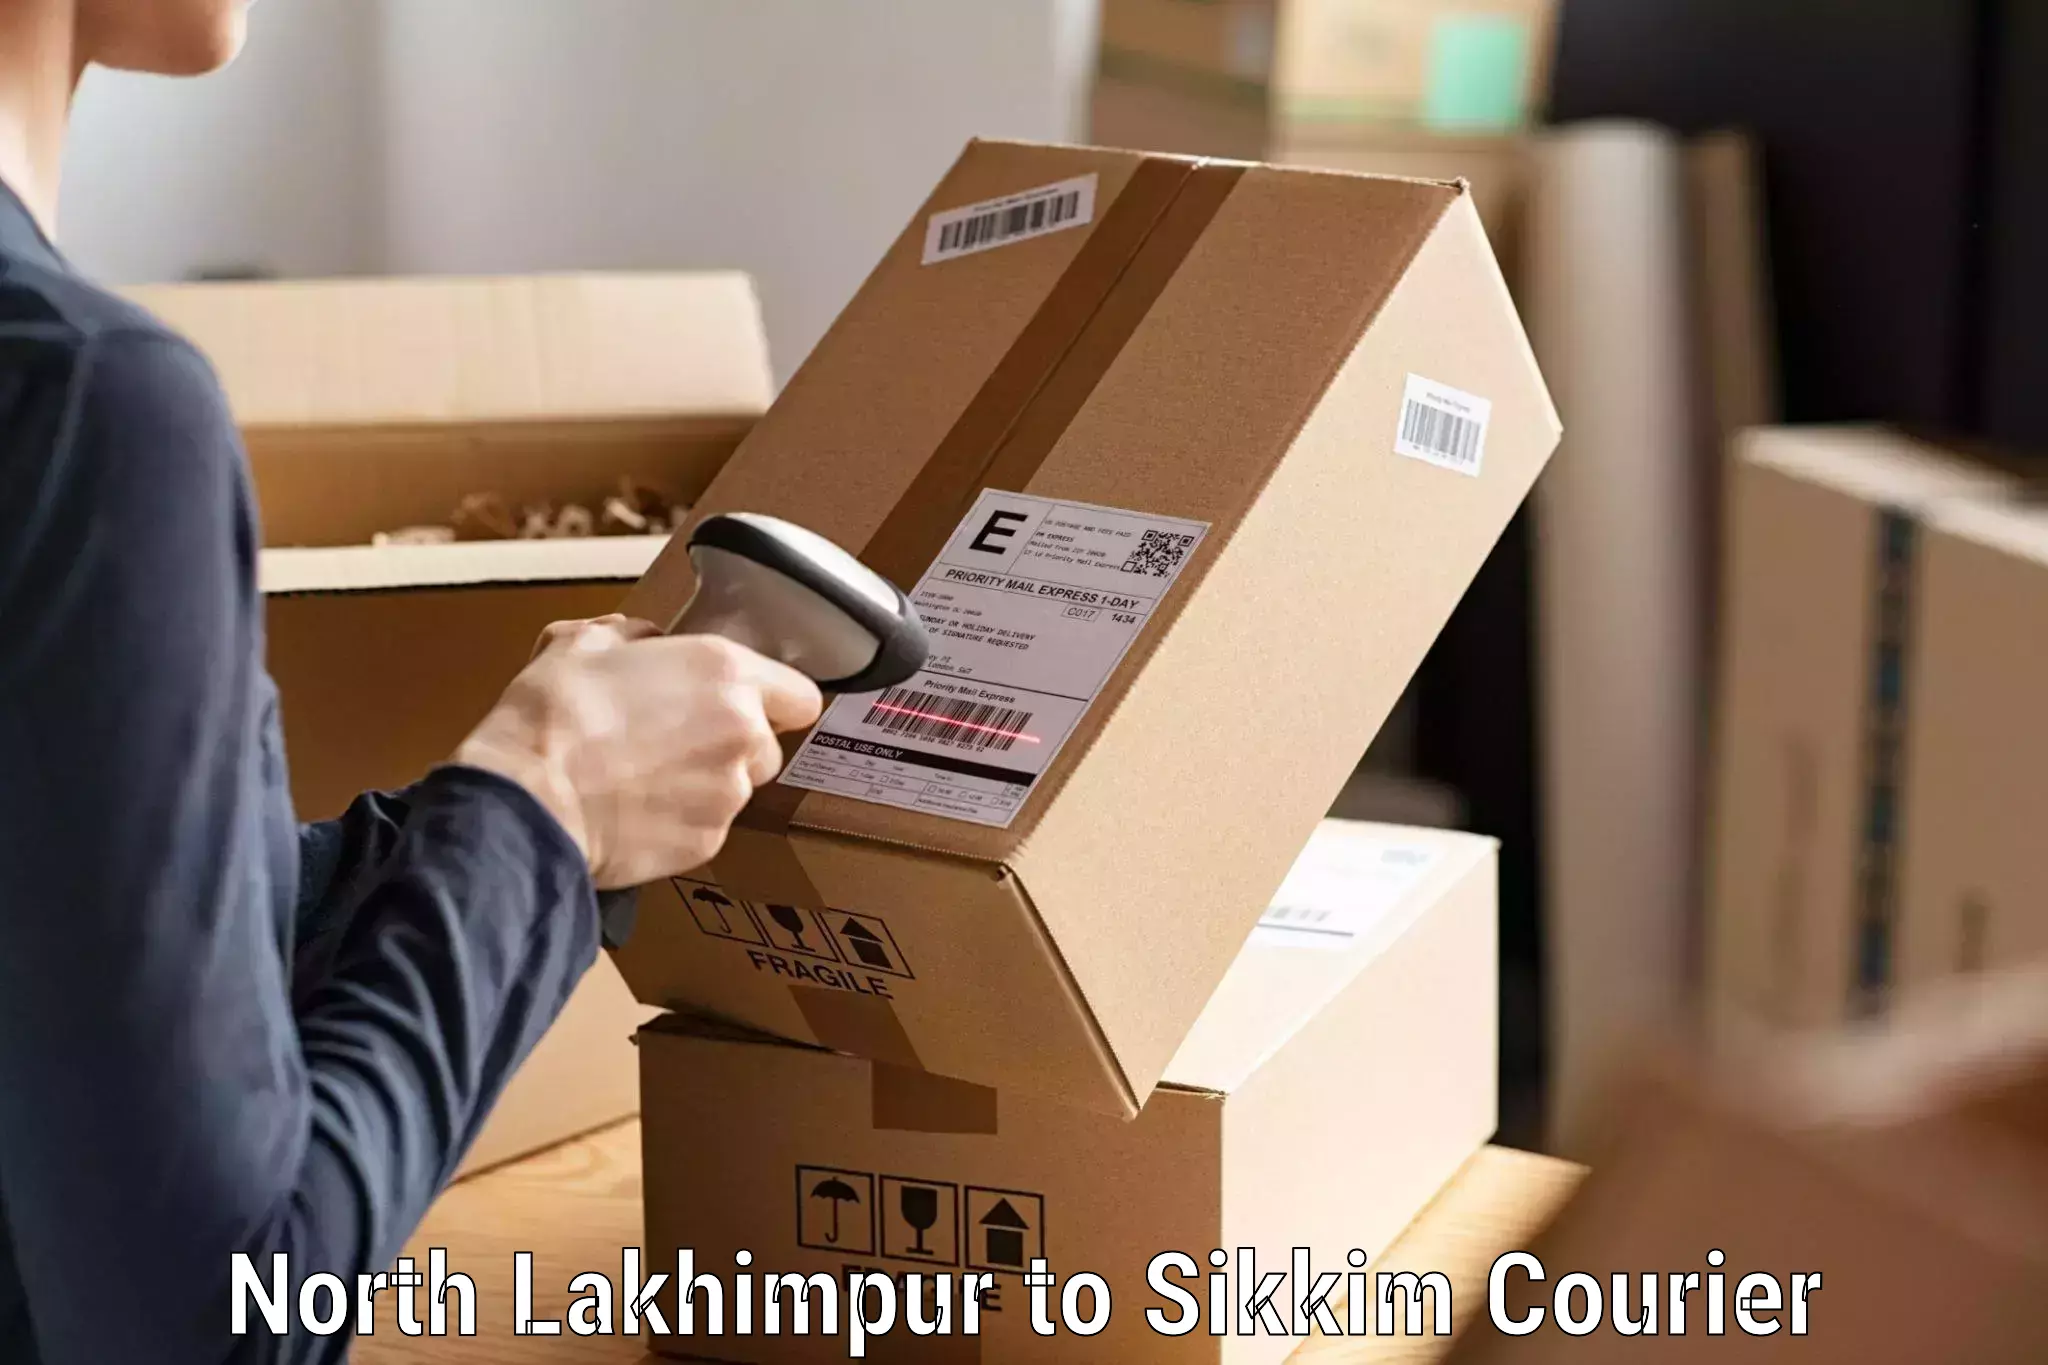 Same-day delivery solutions North Lakhimpur to Gangtok